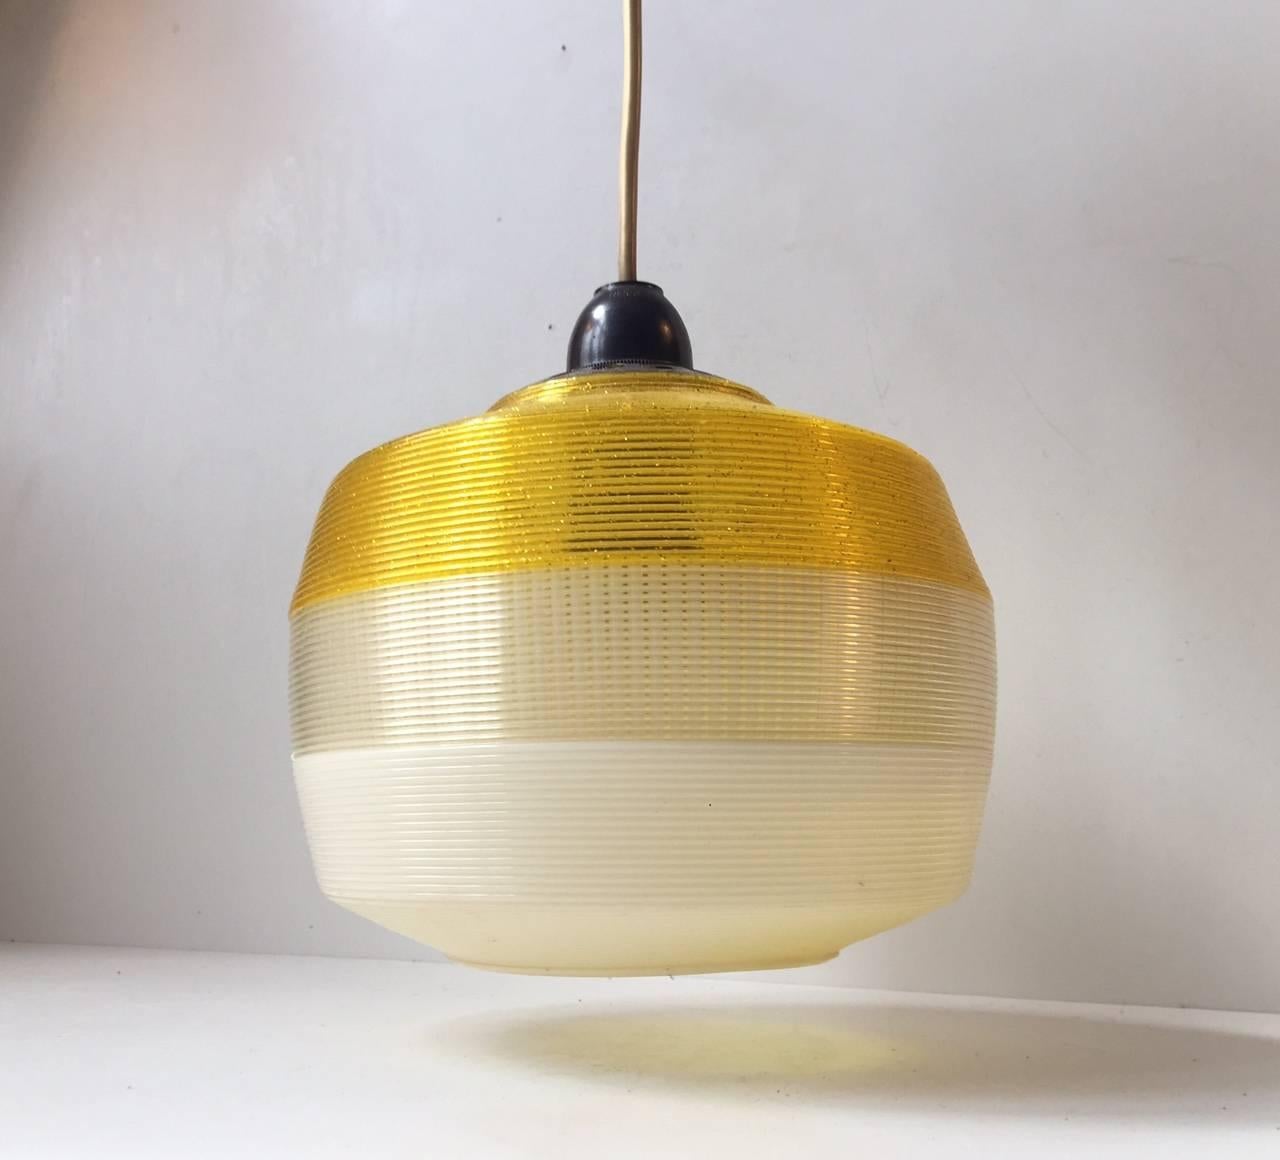 This three-colored pendant lamp manufactured by Rotaflex was produced in France in the 1960s. The lamp is made from acrylic and features horizontal full-body ribbings. The lamp is in good original condition and ready for use.